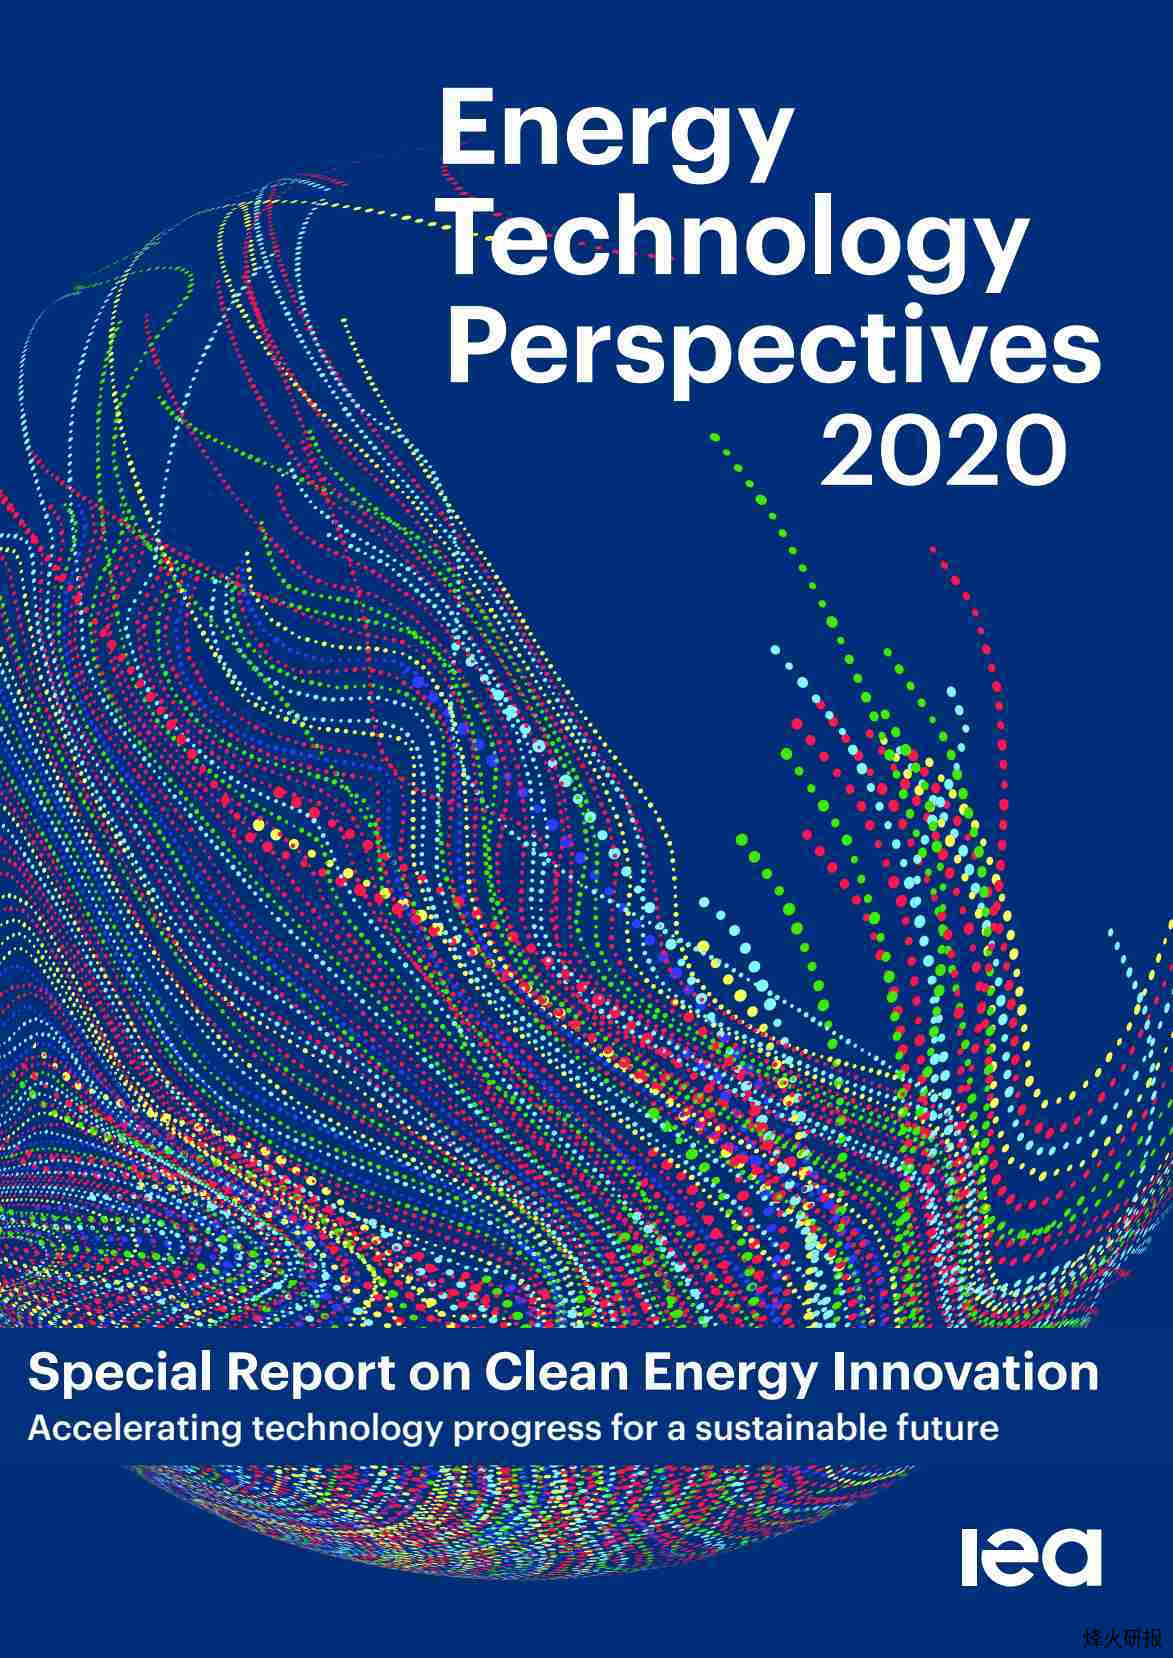 【IEA】Energy_Technology_Perspectives_2020_-_Special_Report_on_Clean_Energy_Innovation.pdf-第一页